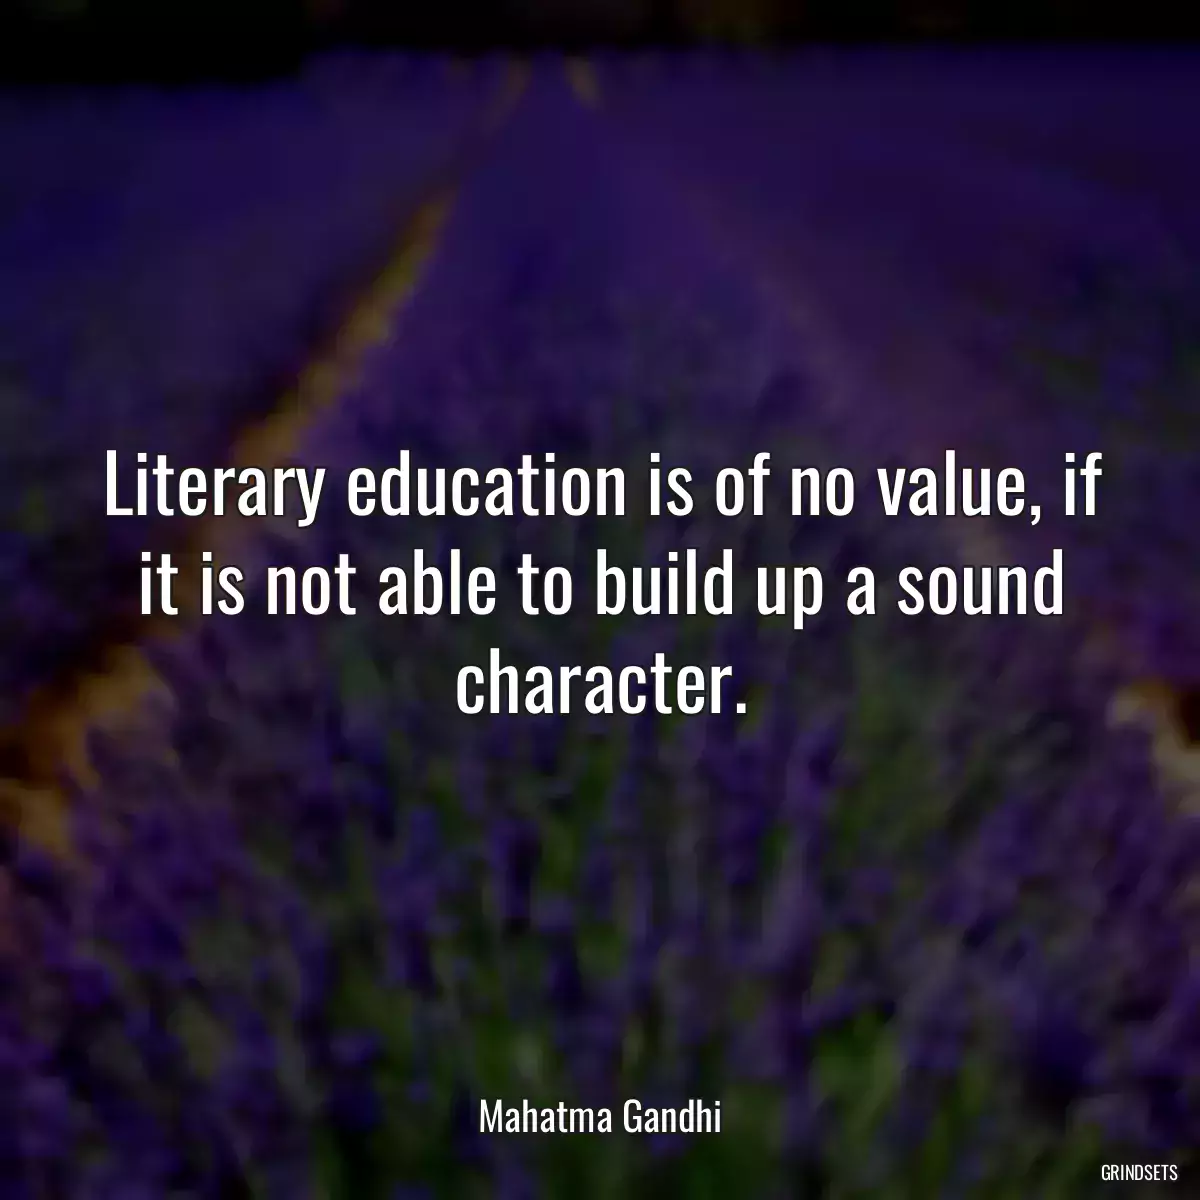 Literary education is of no value, if it is not able to build up a sound character.